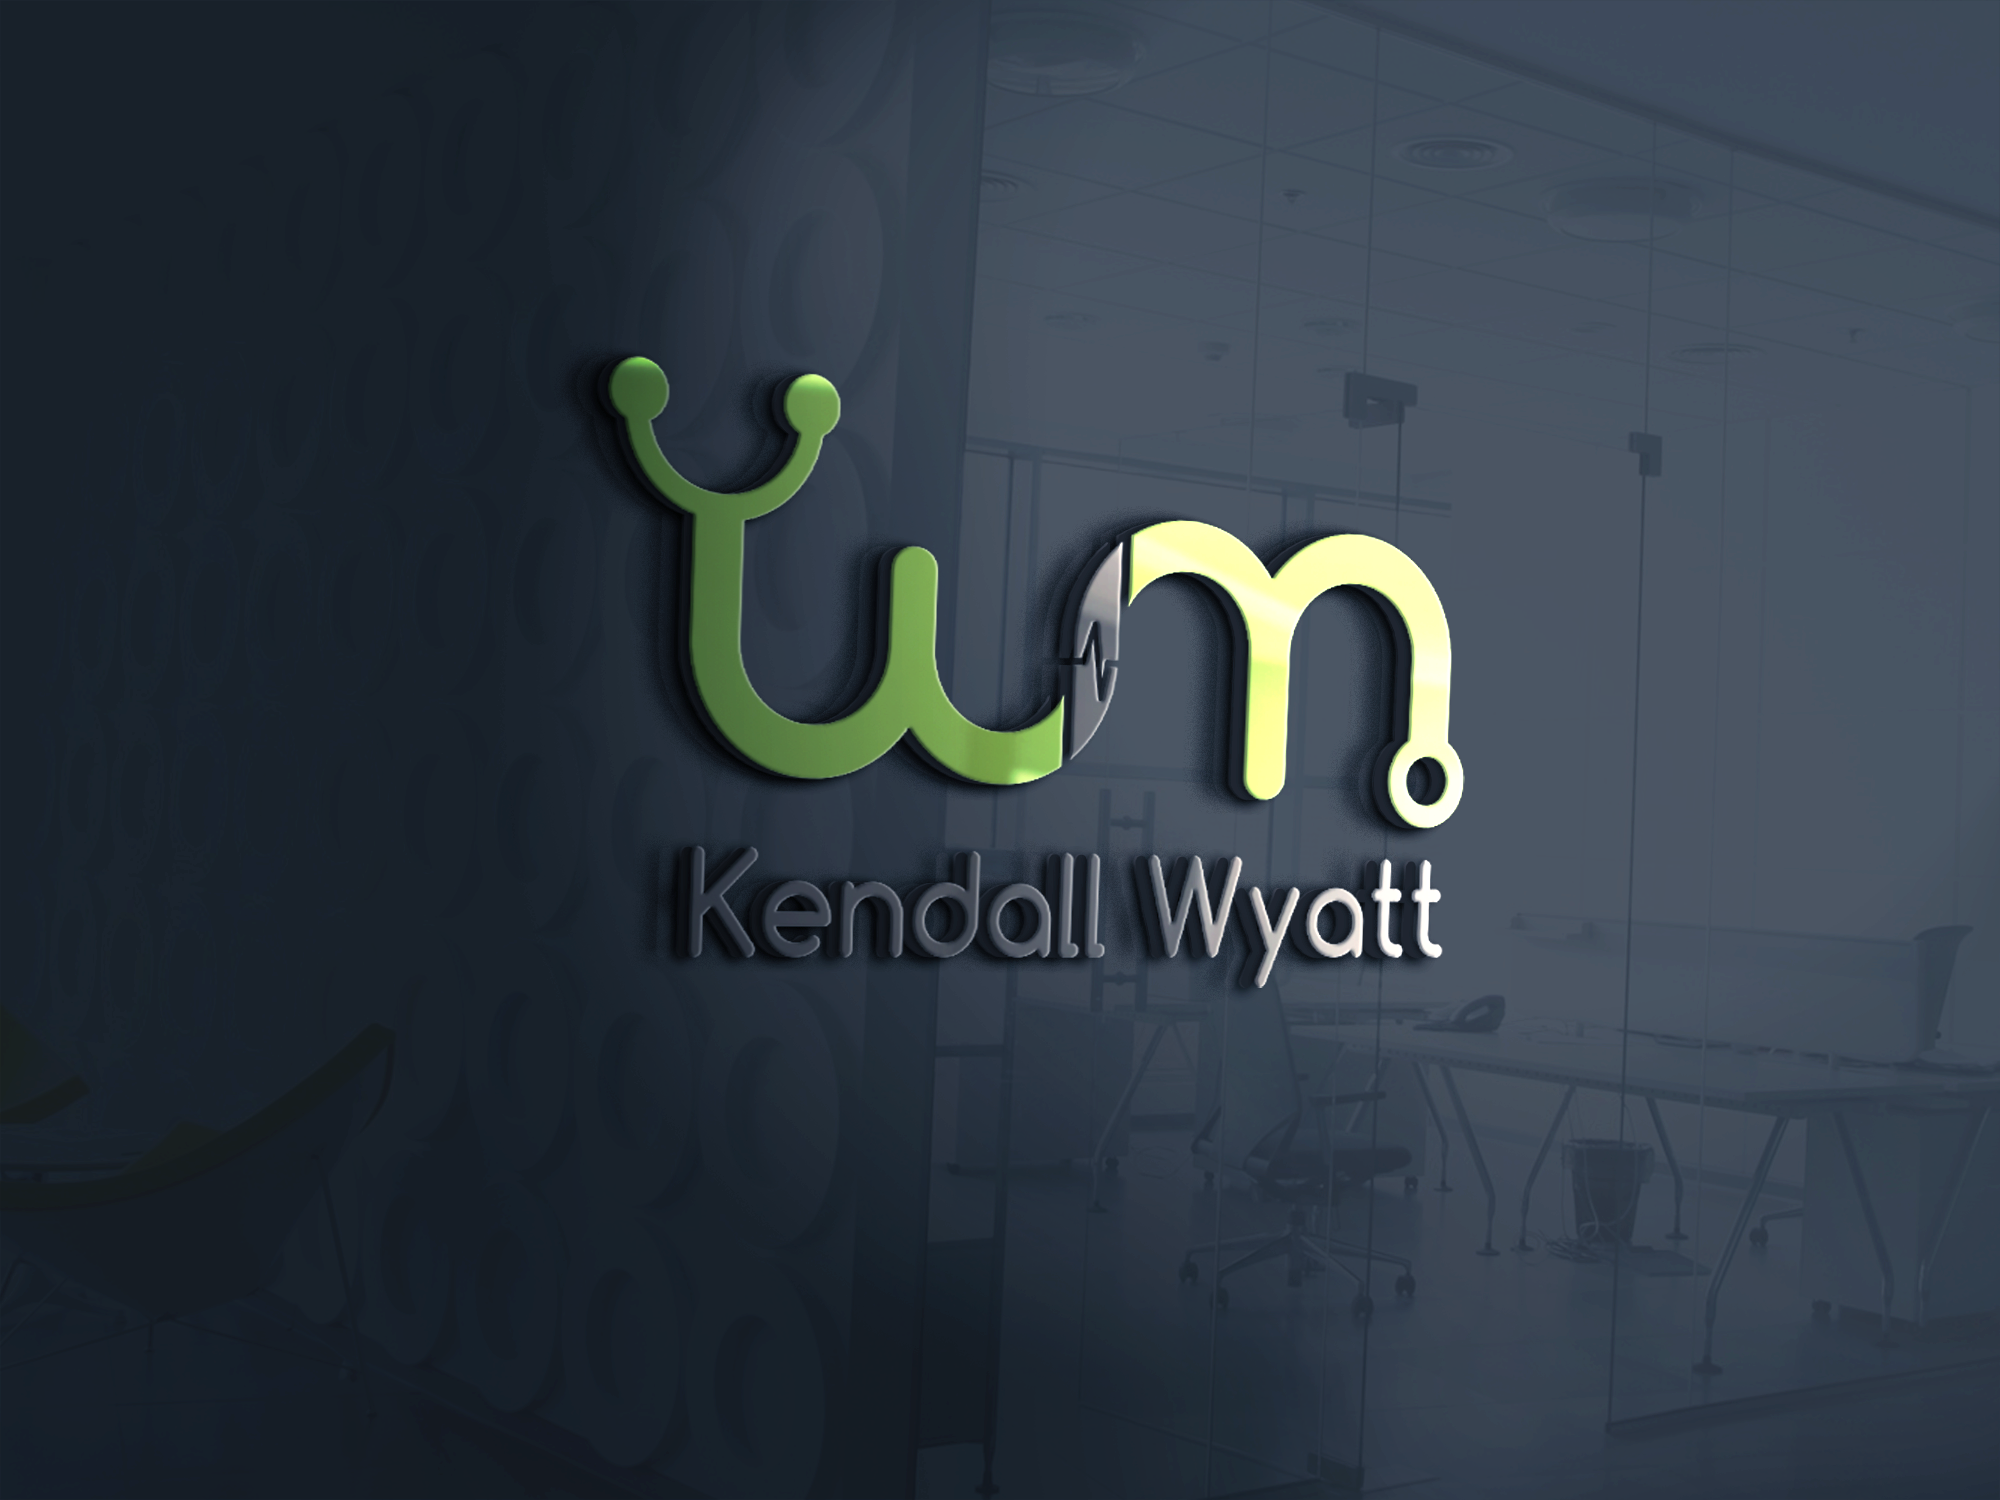 Welcome to Kendall Wyatt.com